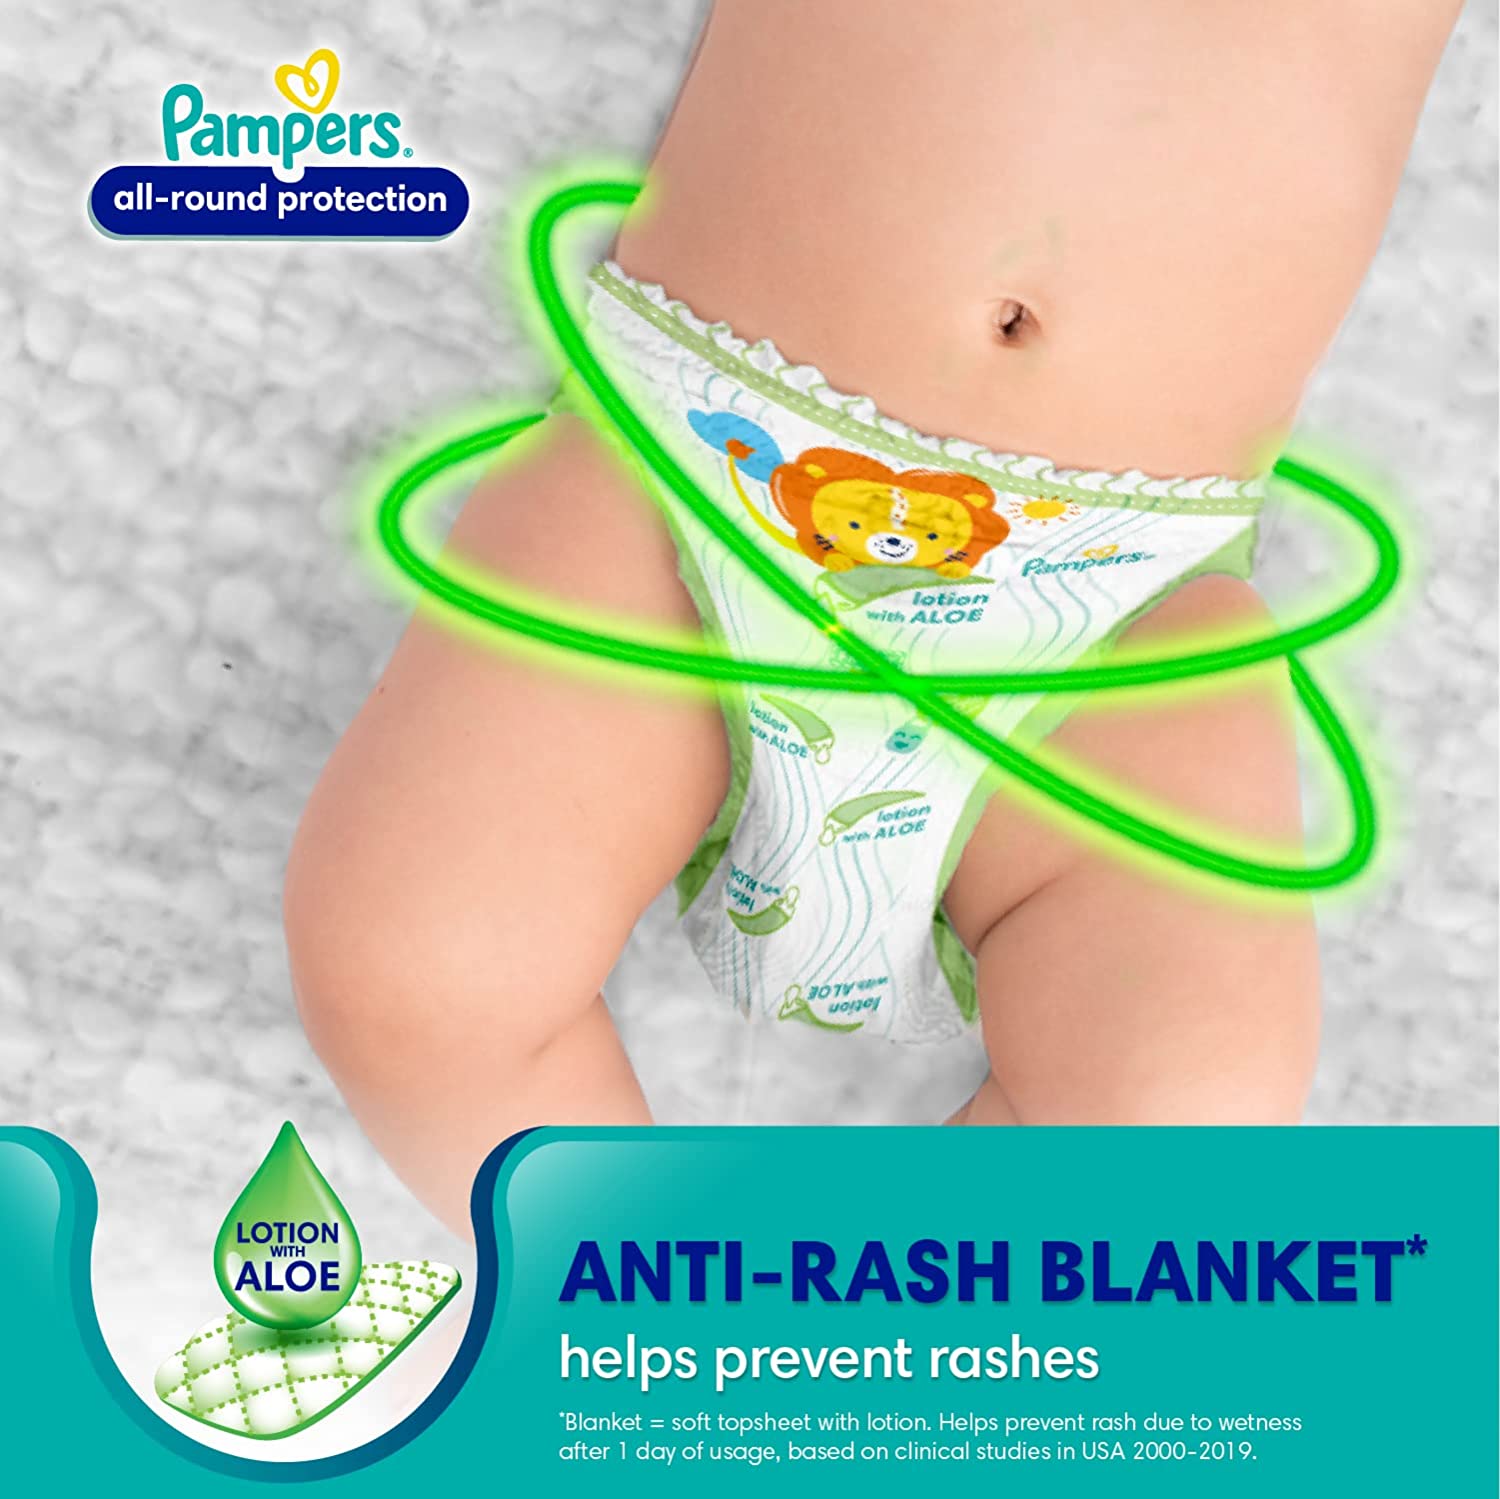 Pampers Diaper Pants (M) - (50 Pieces)